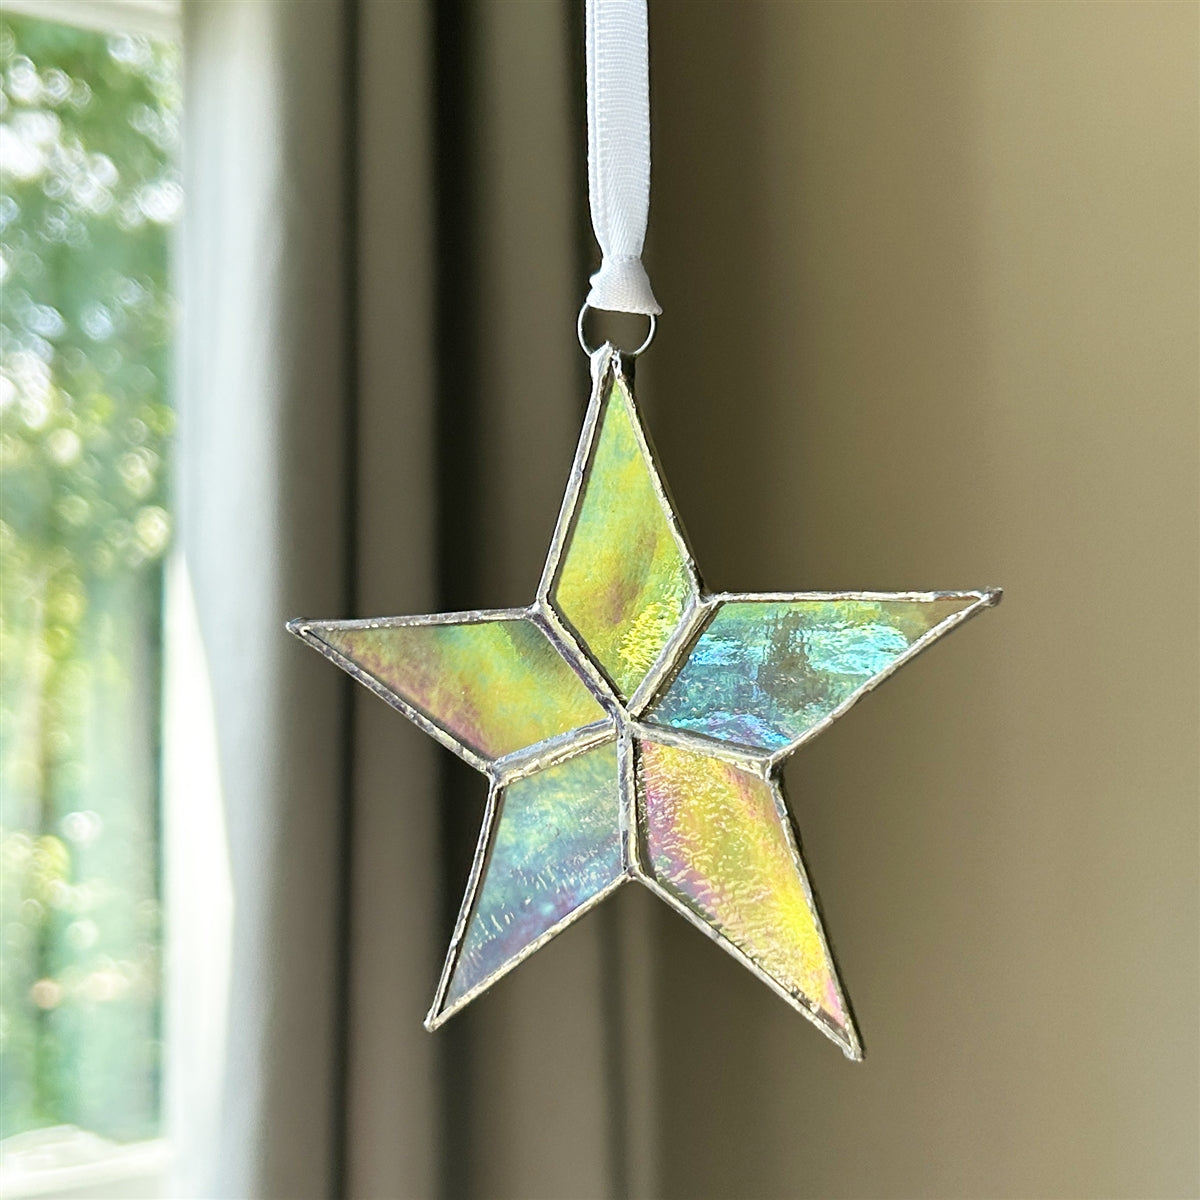 Clear iridescent star with white ribbon for hanging.